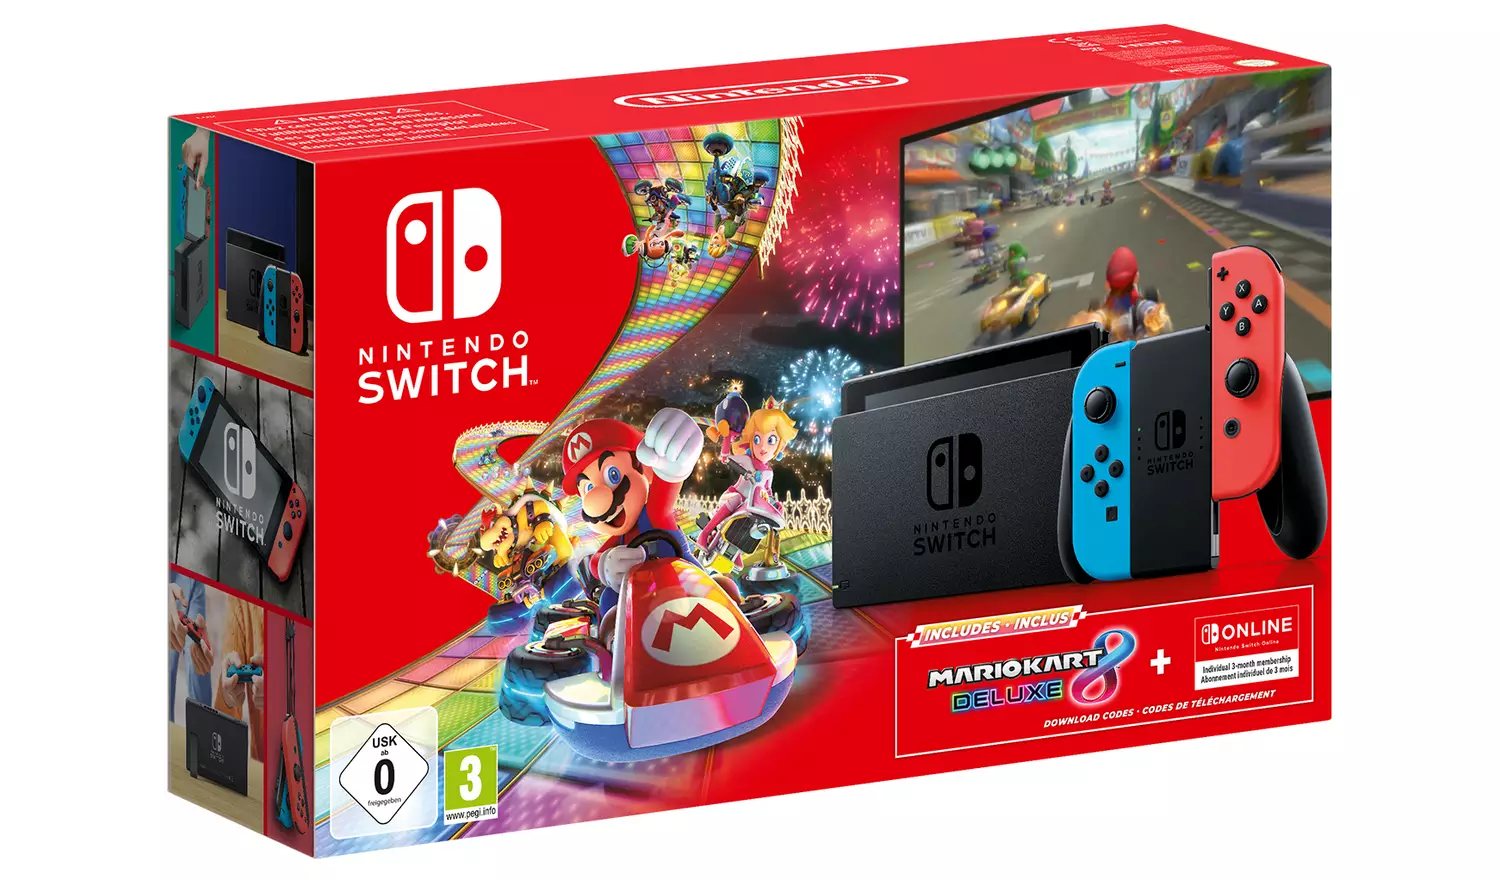 Nintendo Switch was the best-selling games console during UK Black Friday - GamesIndustry.biz